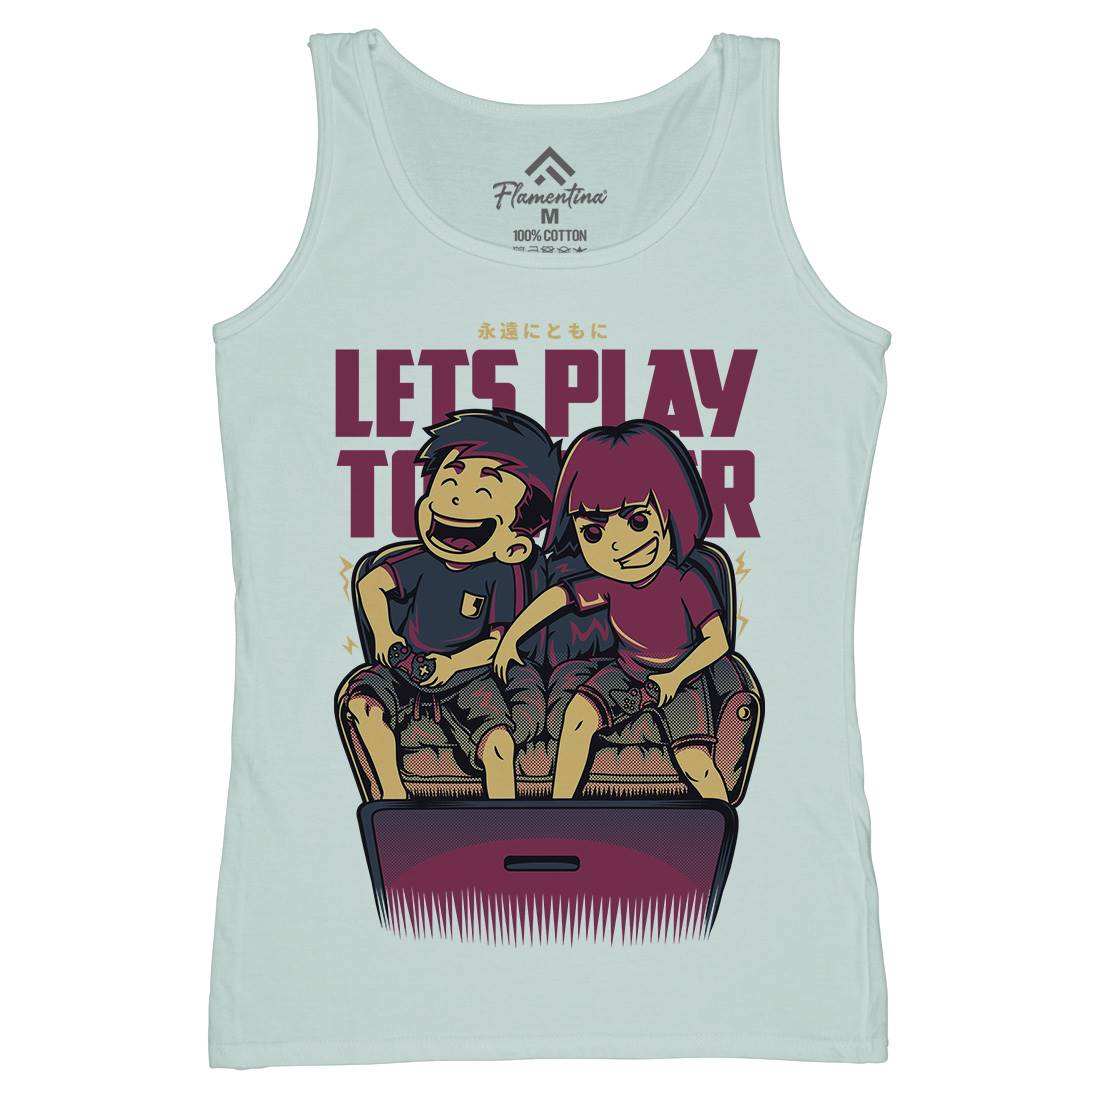 Lets Play Together Womens Organic Tank Top Vest Geek D635